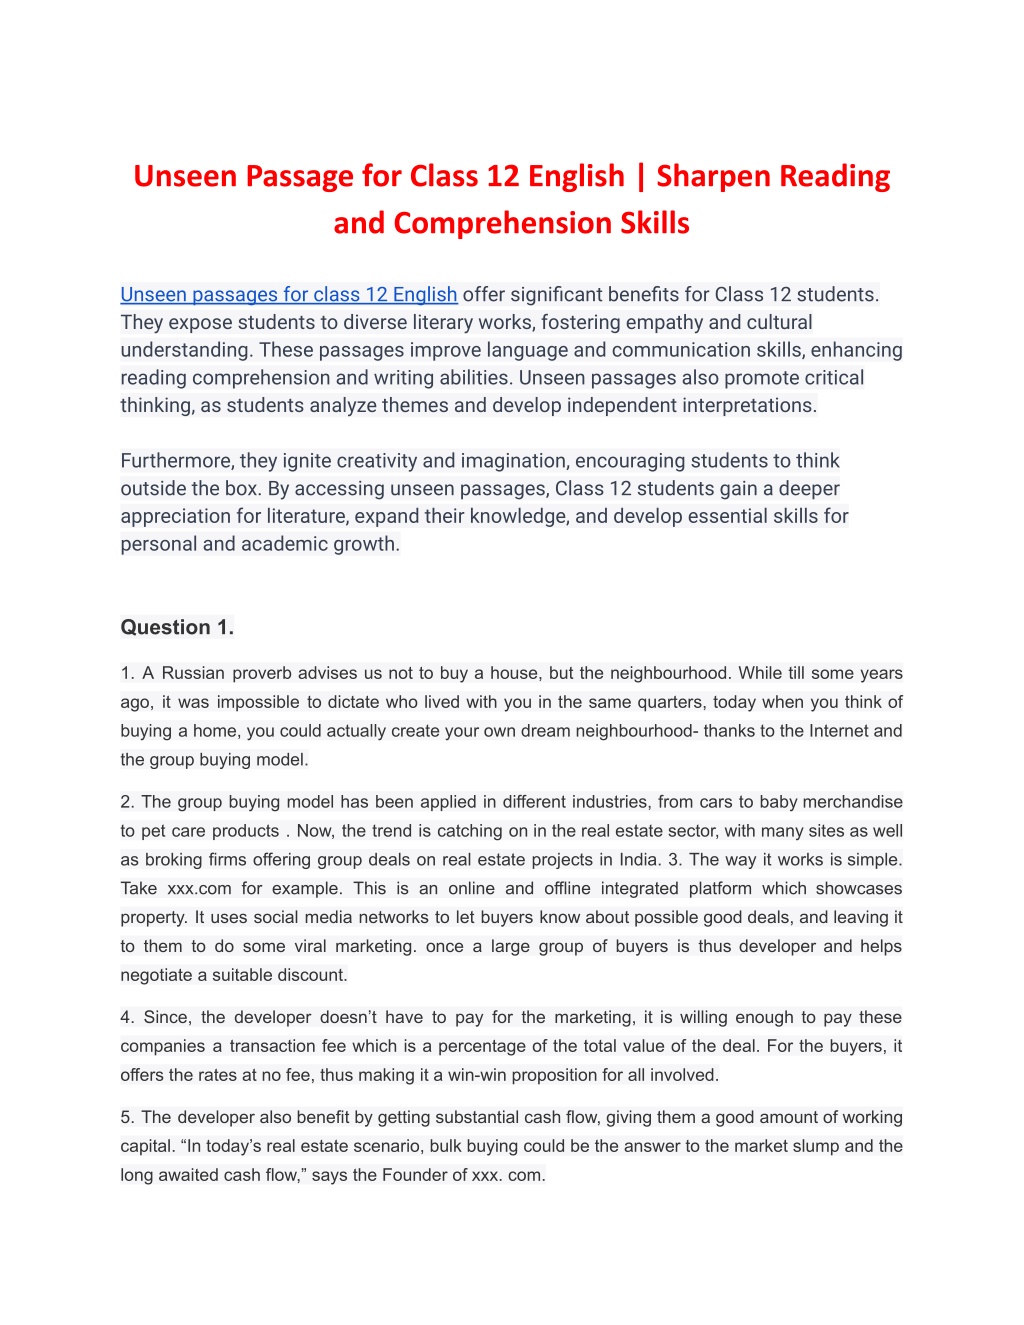 ppt-unseen-passage-for-class-12-english-sharpen-reading-and